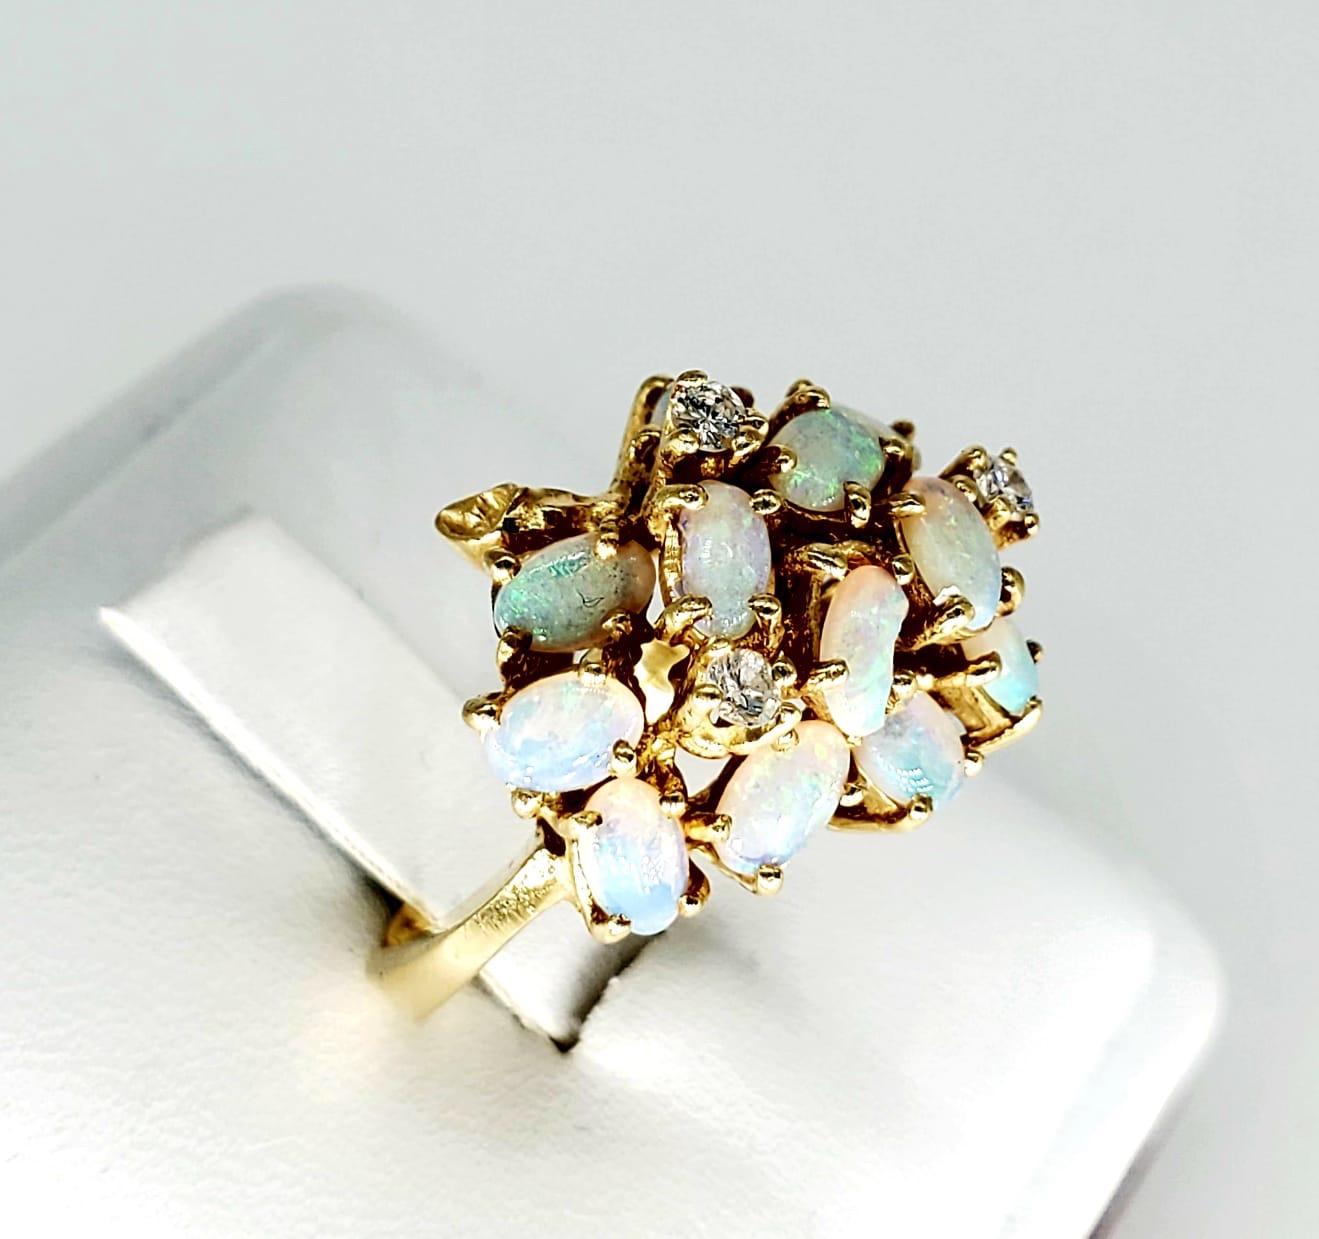 Vintage Opal & Diamond 14k Gold Cluster Ring. Stunning decorative design by this maker. This ring features approx 2.85 carat of opal gemstones and approx 0.15 carat of white diamonds featured in the center. The ring weights 7.5 grams and is a size 7.